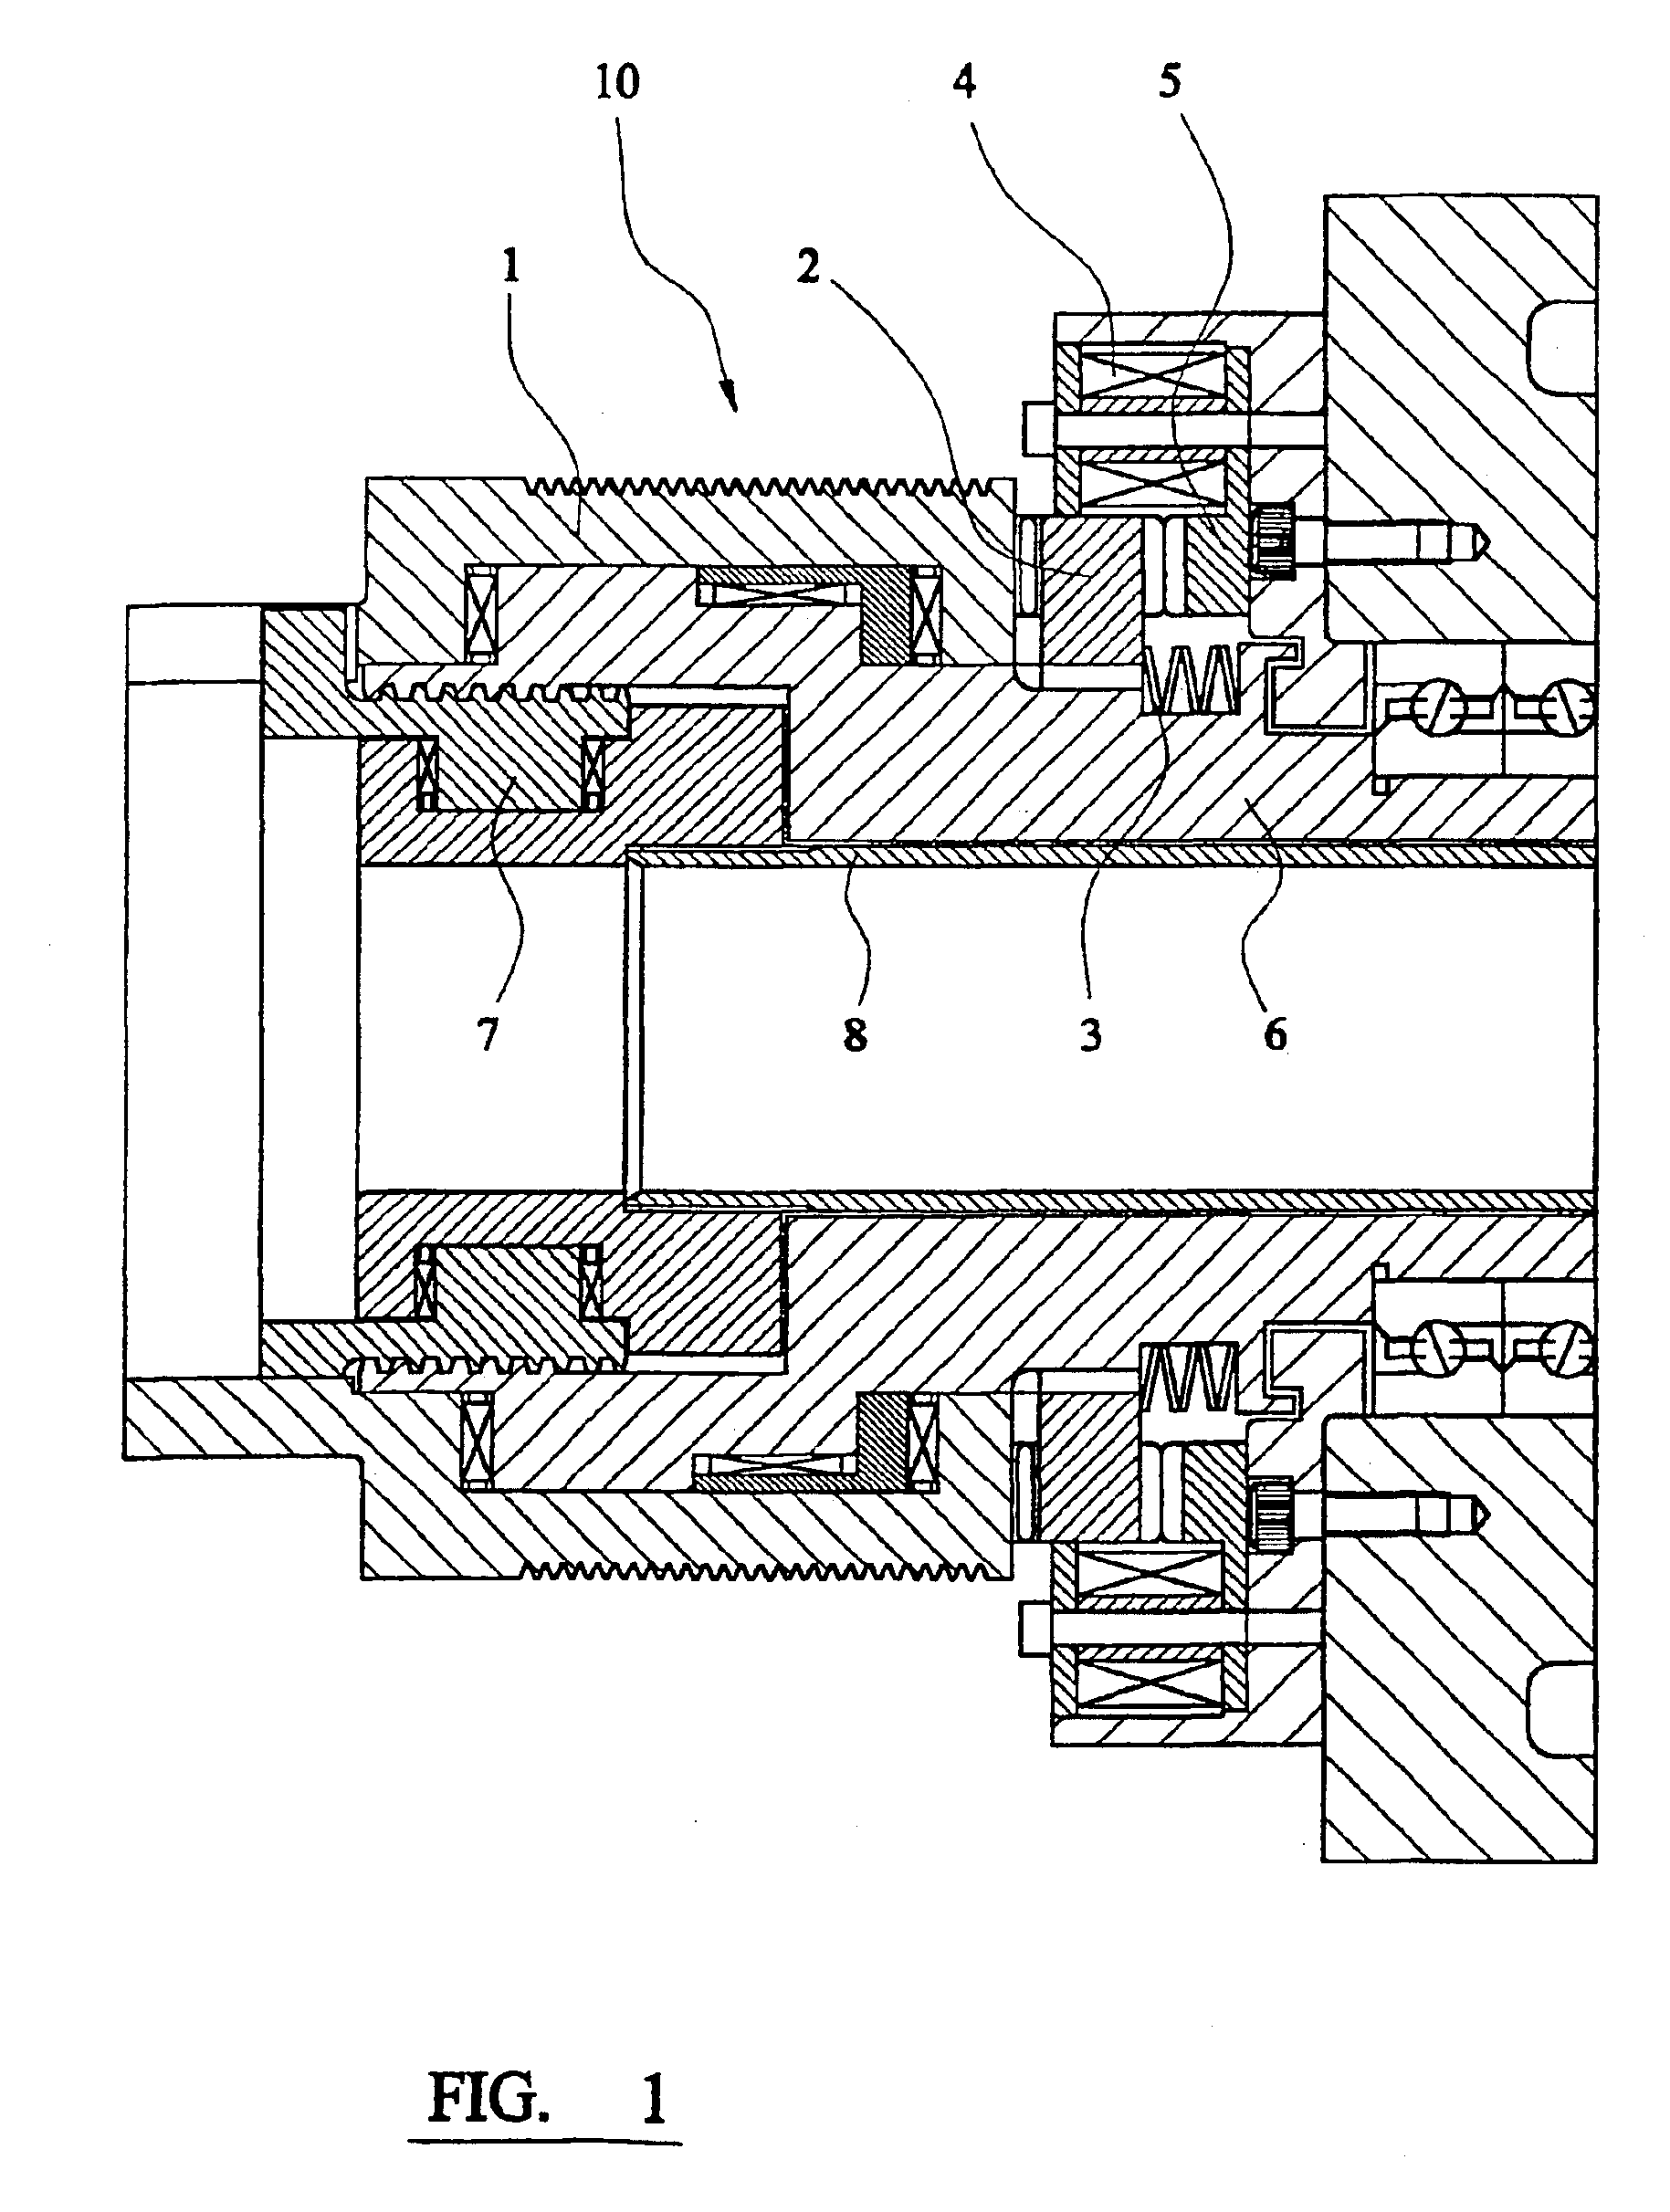 Actuator for workpiece holding device